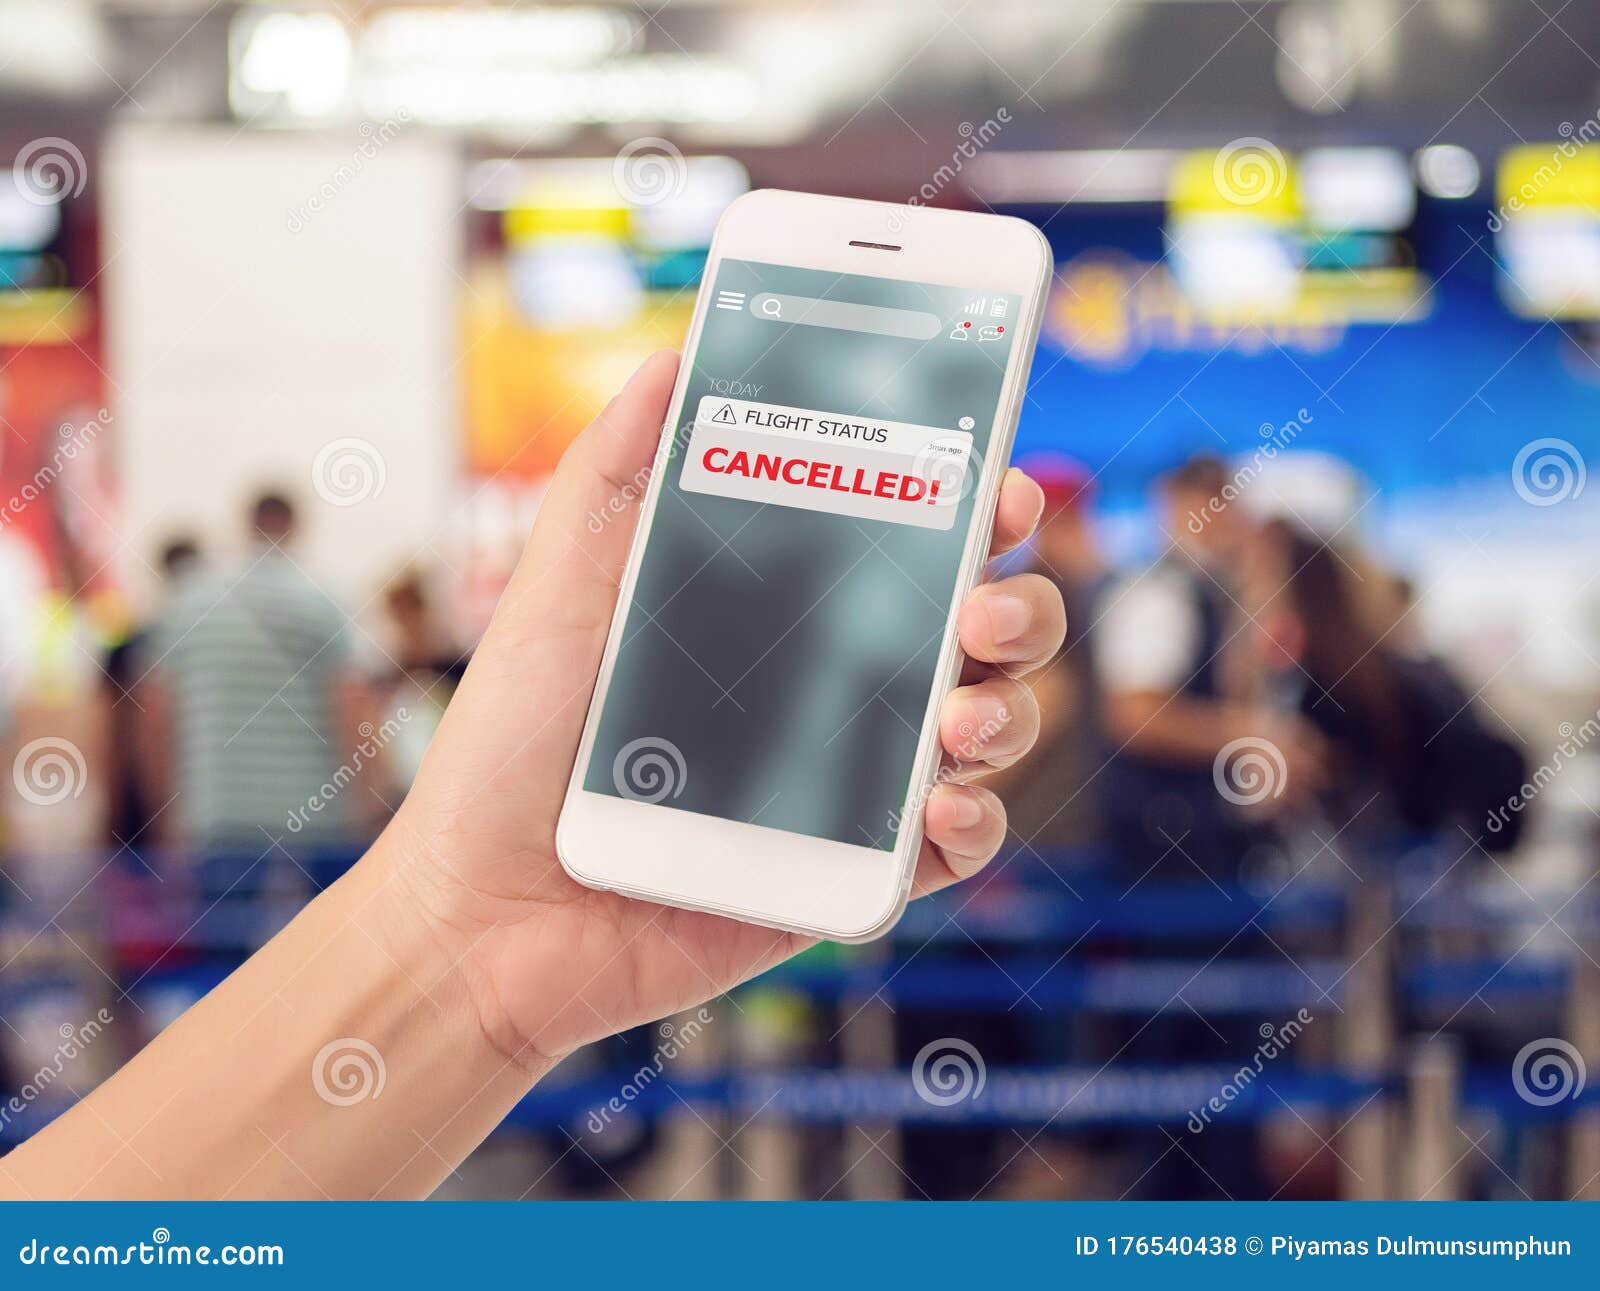 Phone by flight PBI MMH cancellation to from